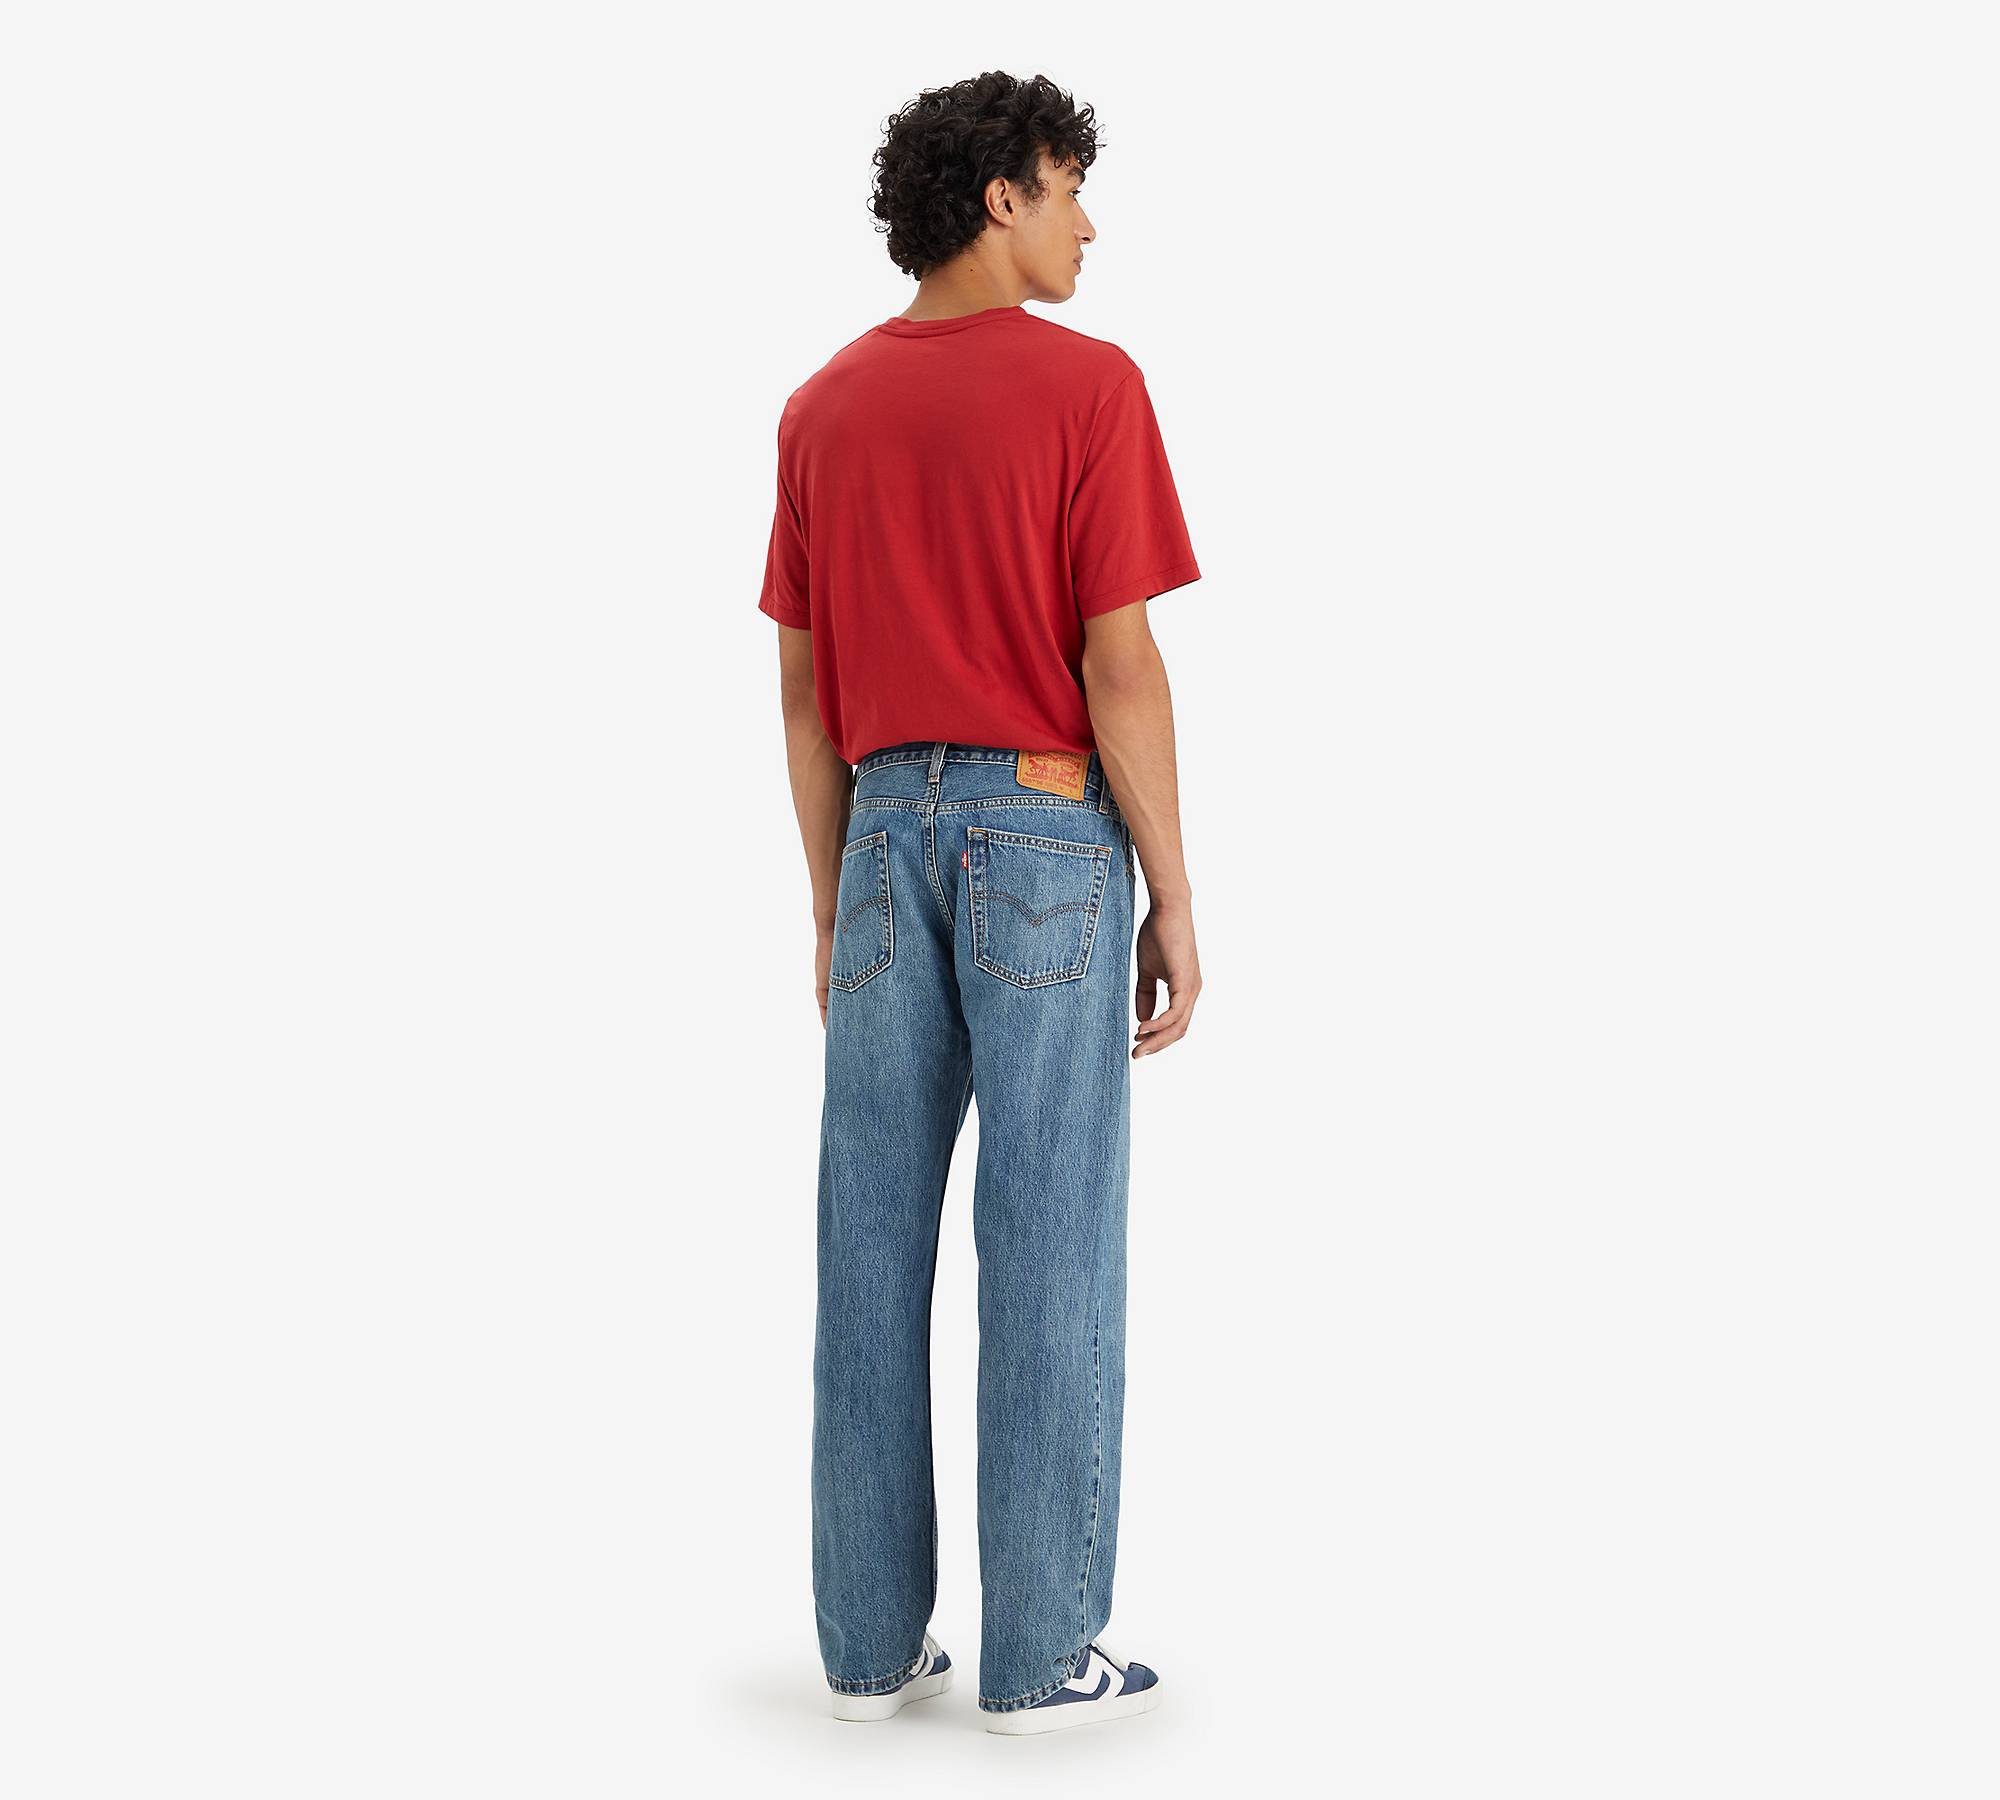 555™ Relaxed Straight Men's Jeans - Medium Wash | Levi's® US